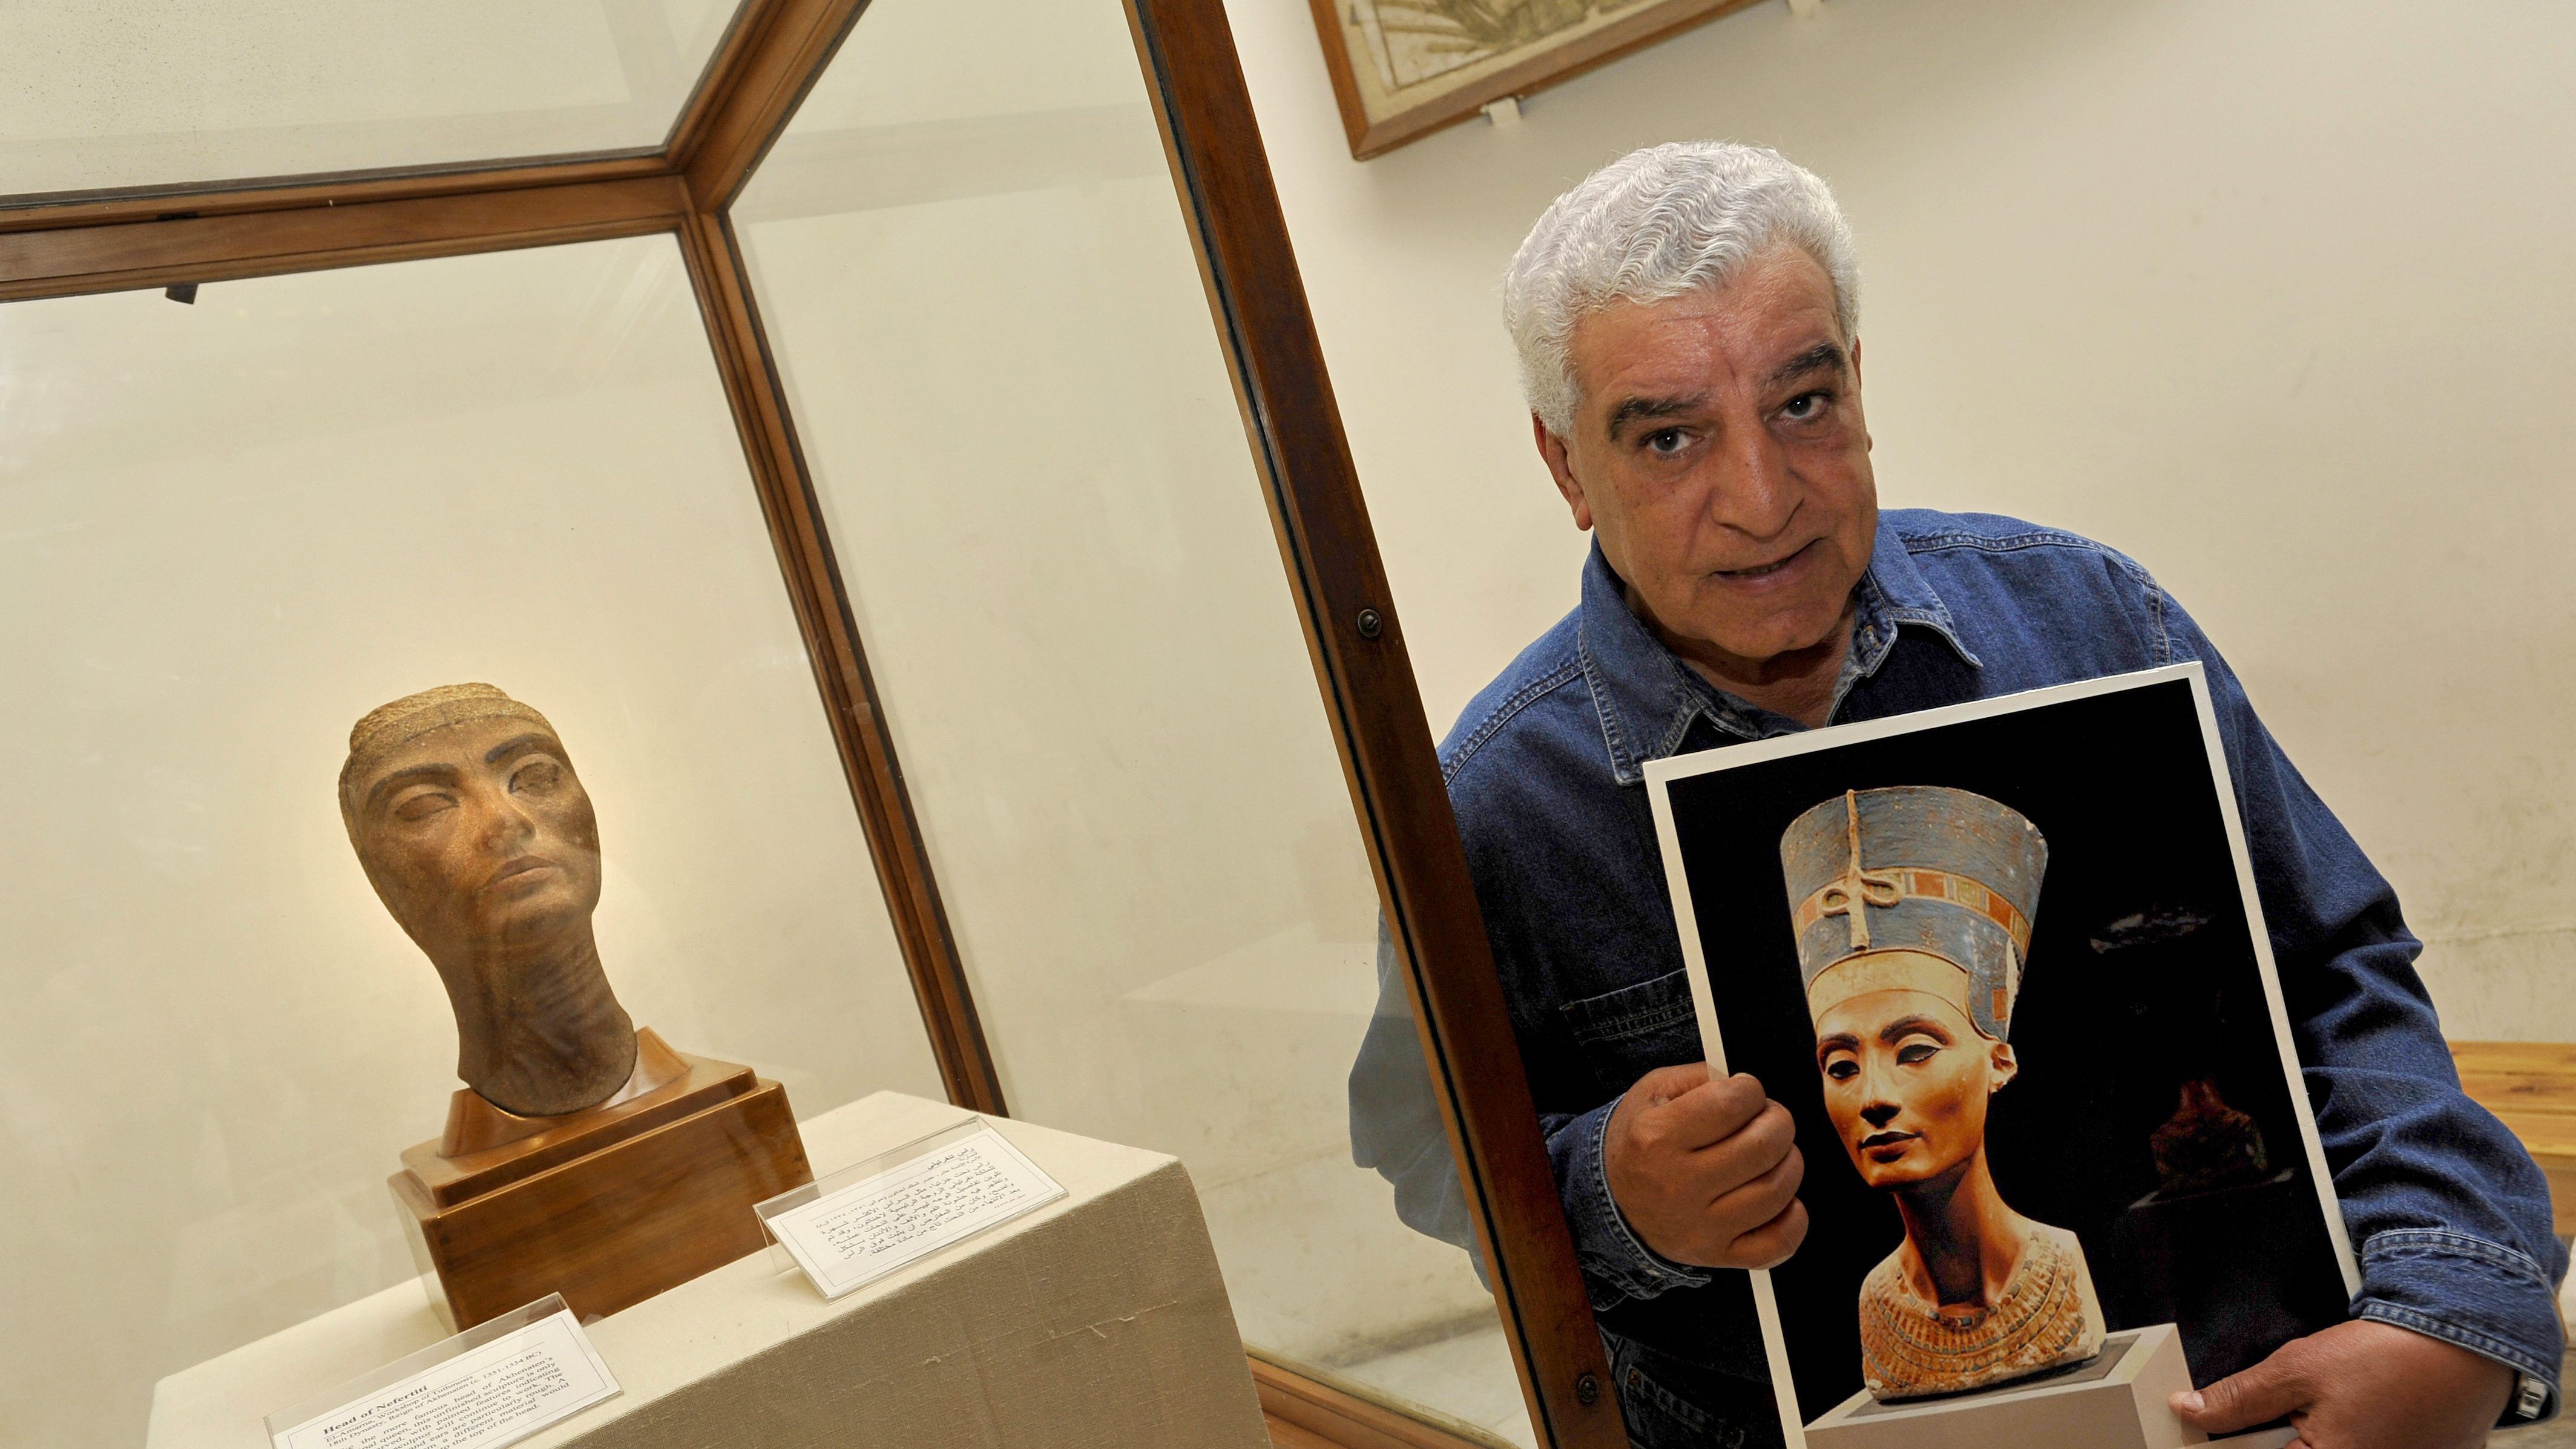 Archaeologist Launches Repatriation Campaign for Egyptian Treasures